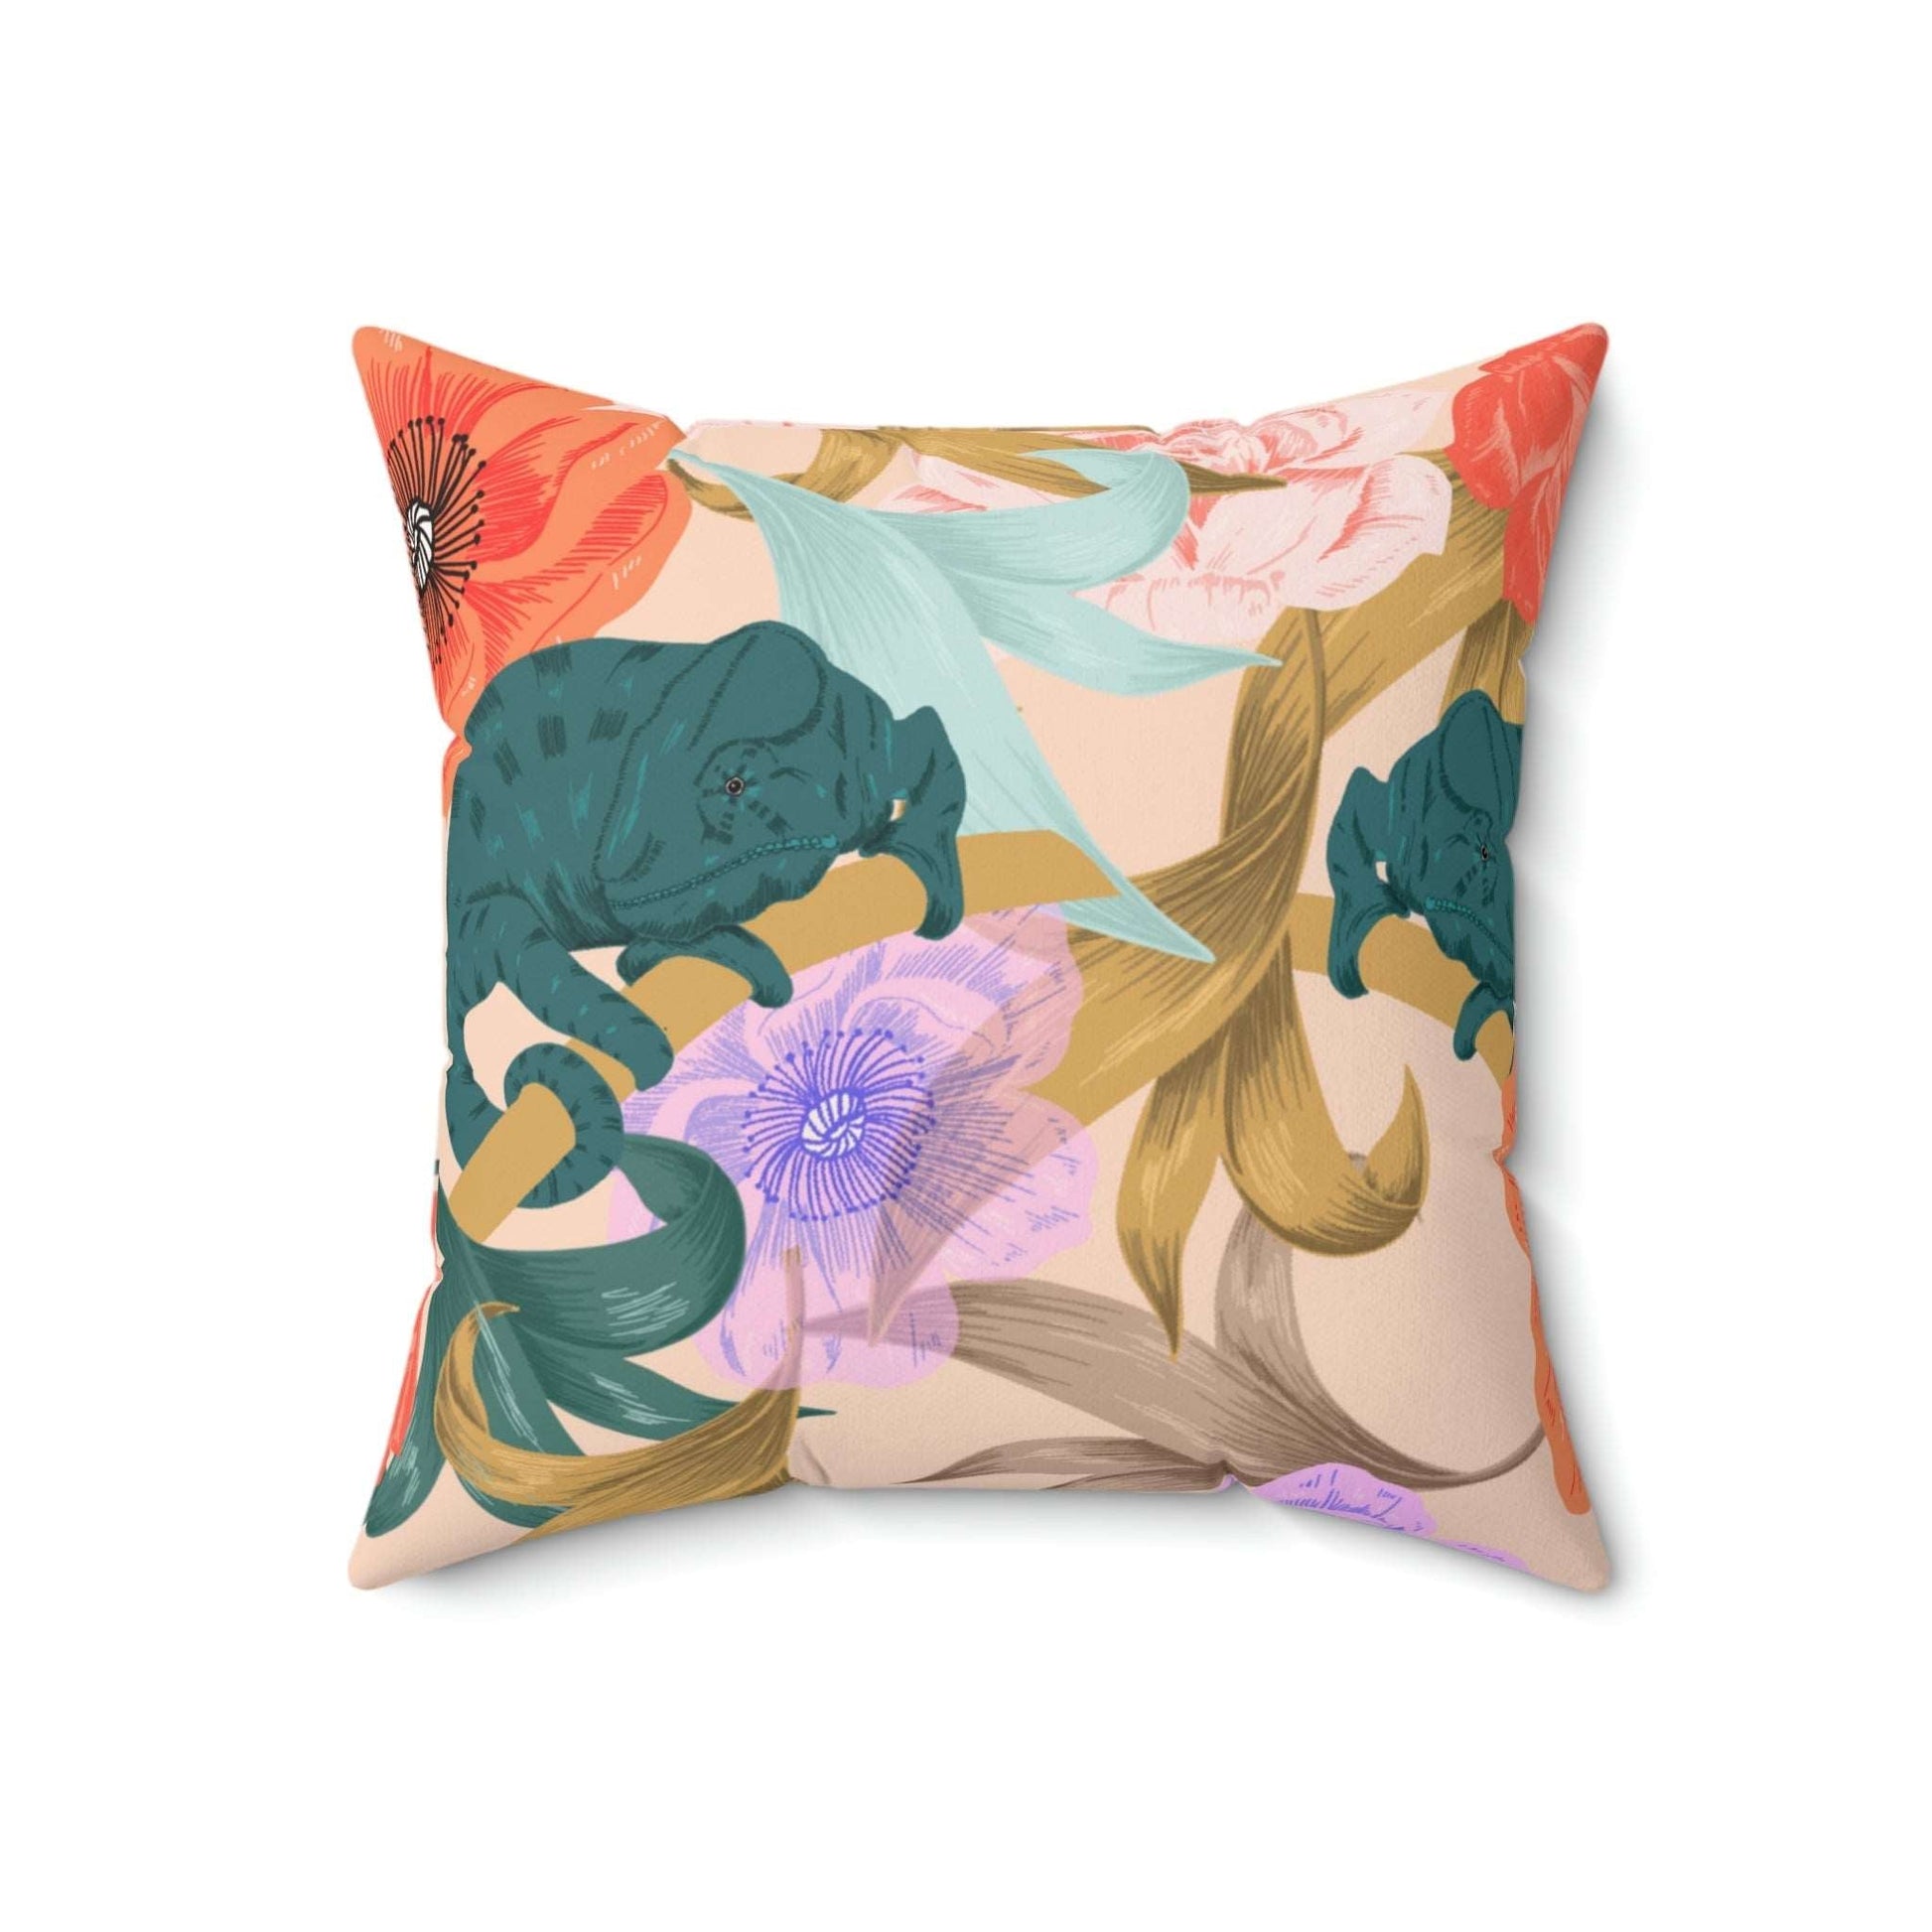 Chameleon in Flowers Square Pillow Home Decor Pink Sweetheart